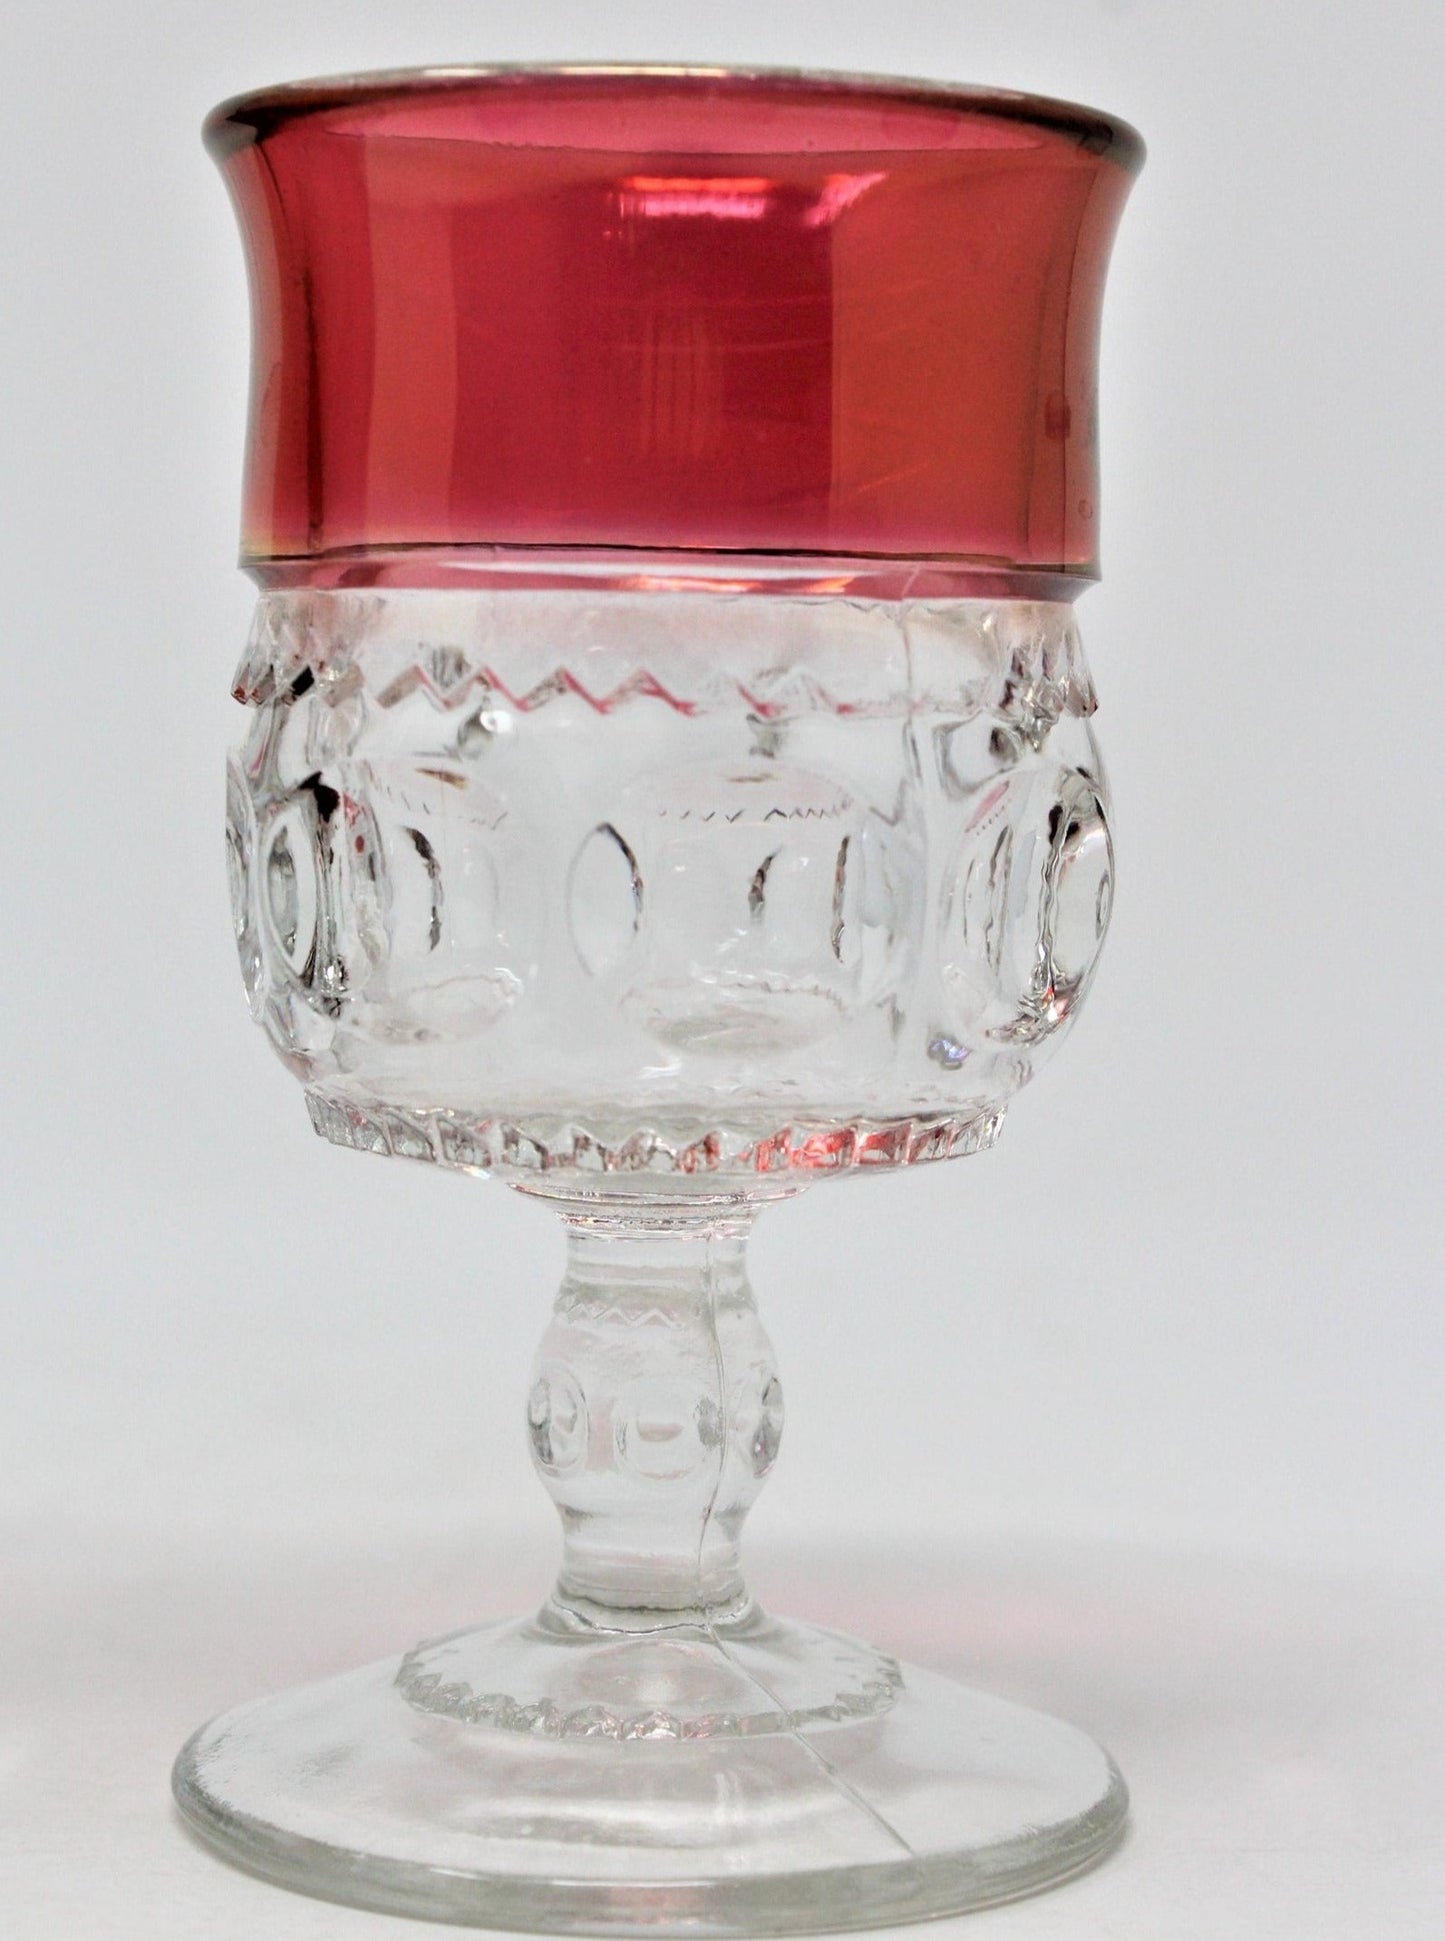 Cordials, Indiana Glass Kings Crown (Thumbprint) Ruby Iridescent, Set of 3, Vintage